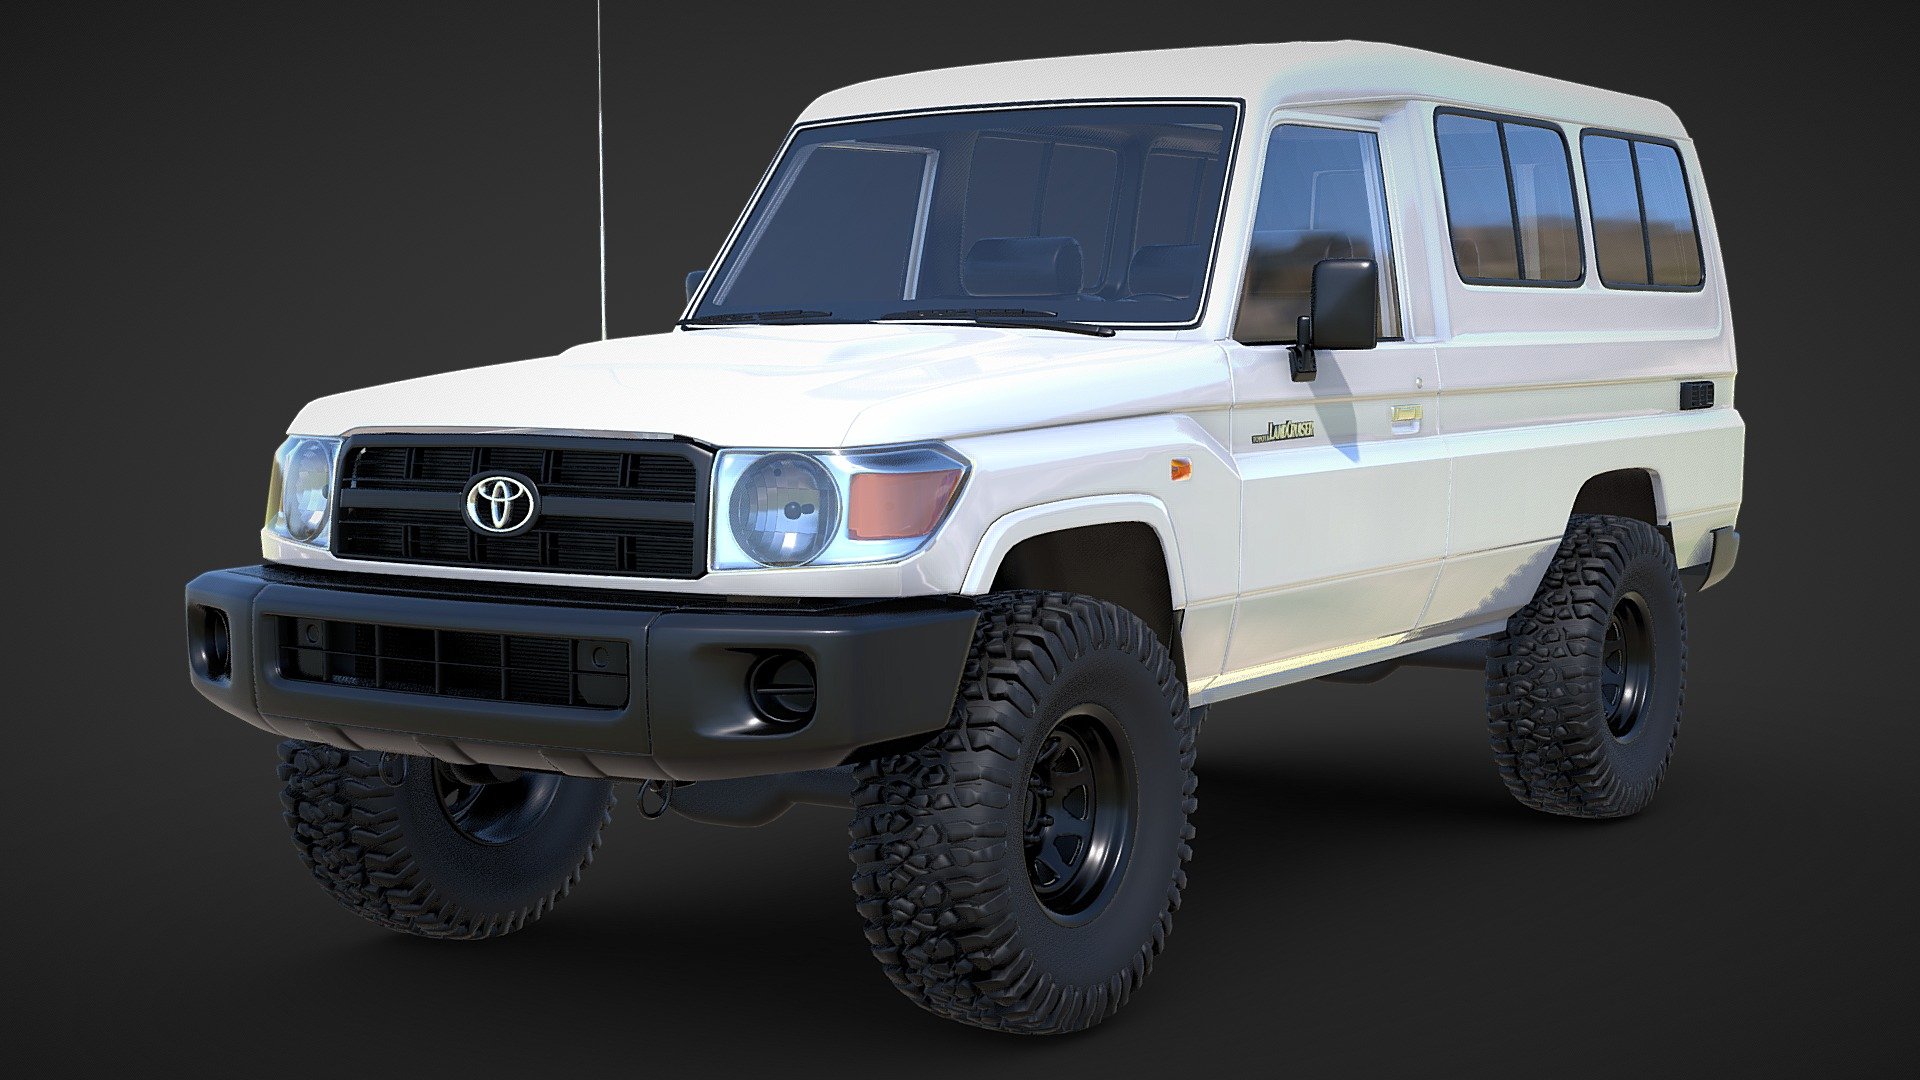 Toyota Landcruiser 78 Series Stock Variation - Toyota Landcruiser 78 Series Stock - Buy Royalty Free 3D model by Pitstop3D - 4x4 (@Pitstop3D-4x4) 3d model